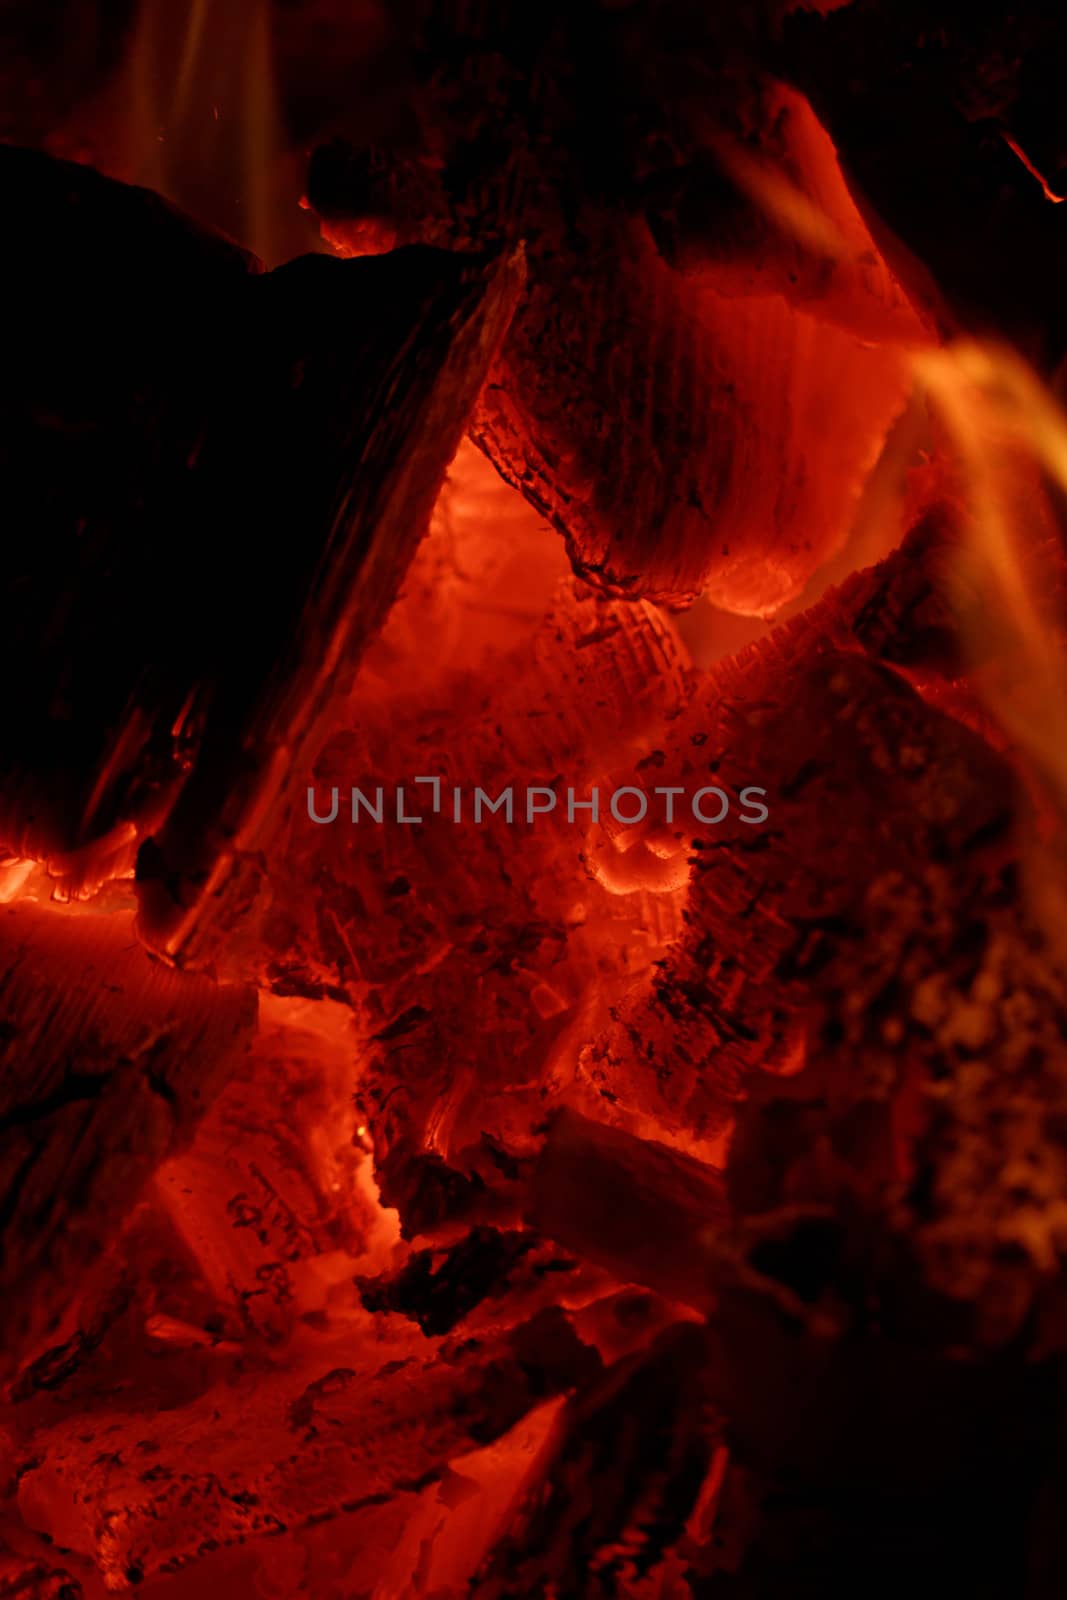 glowing embers in hot red color